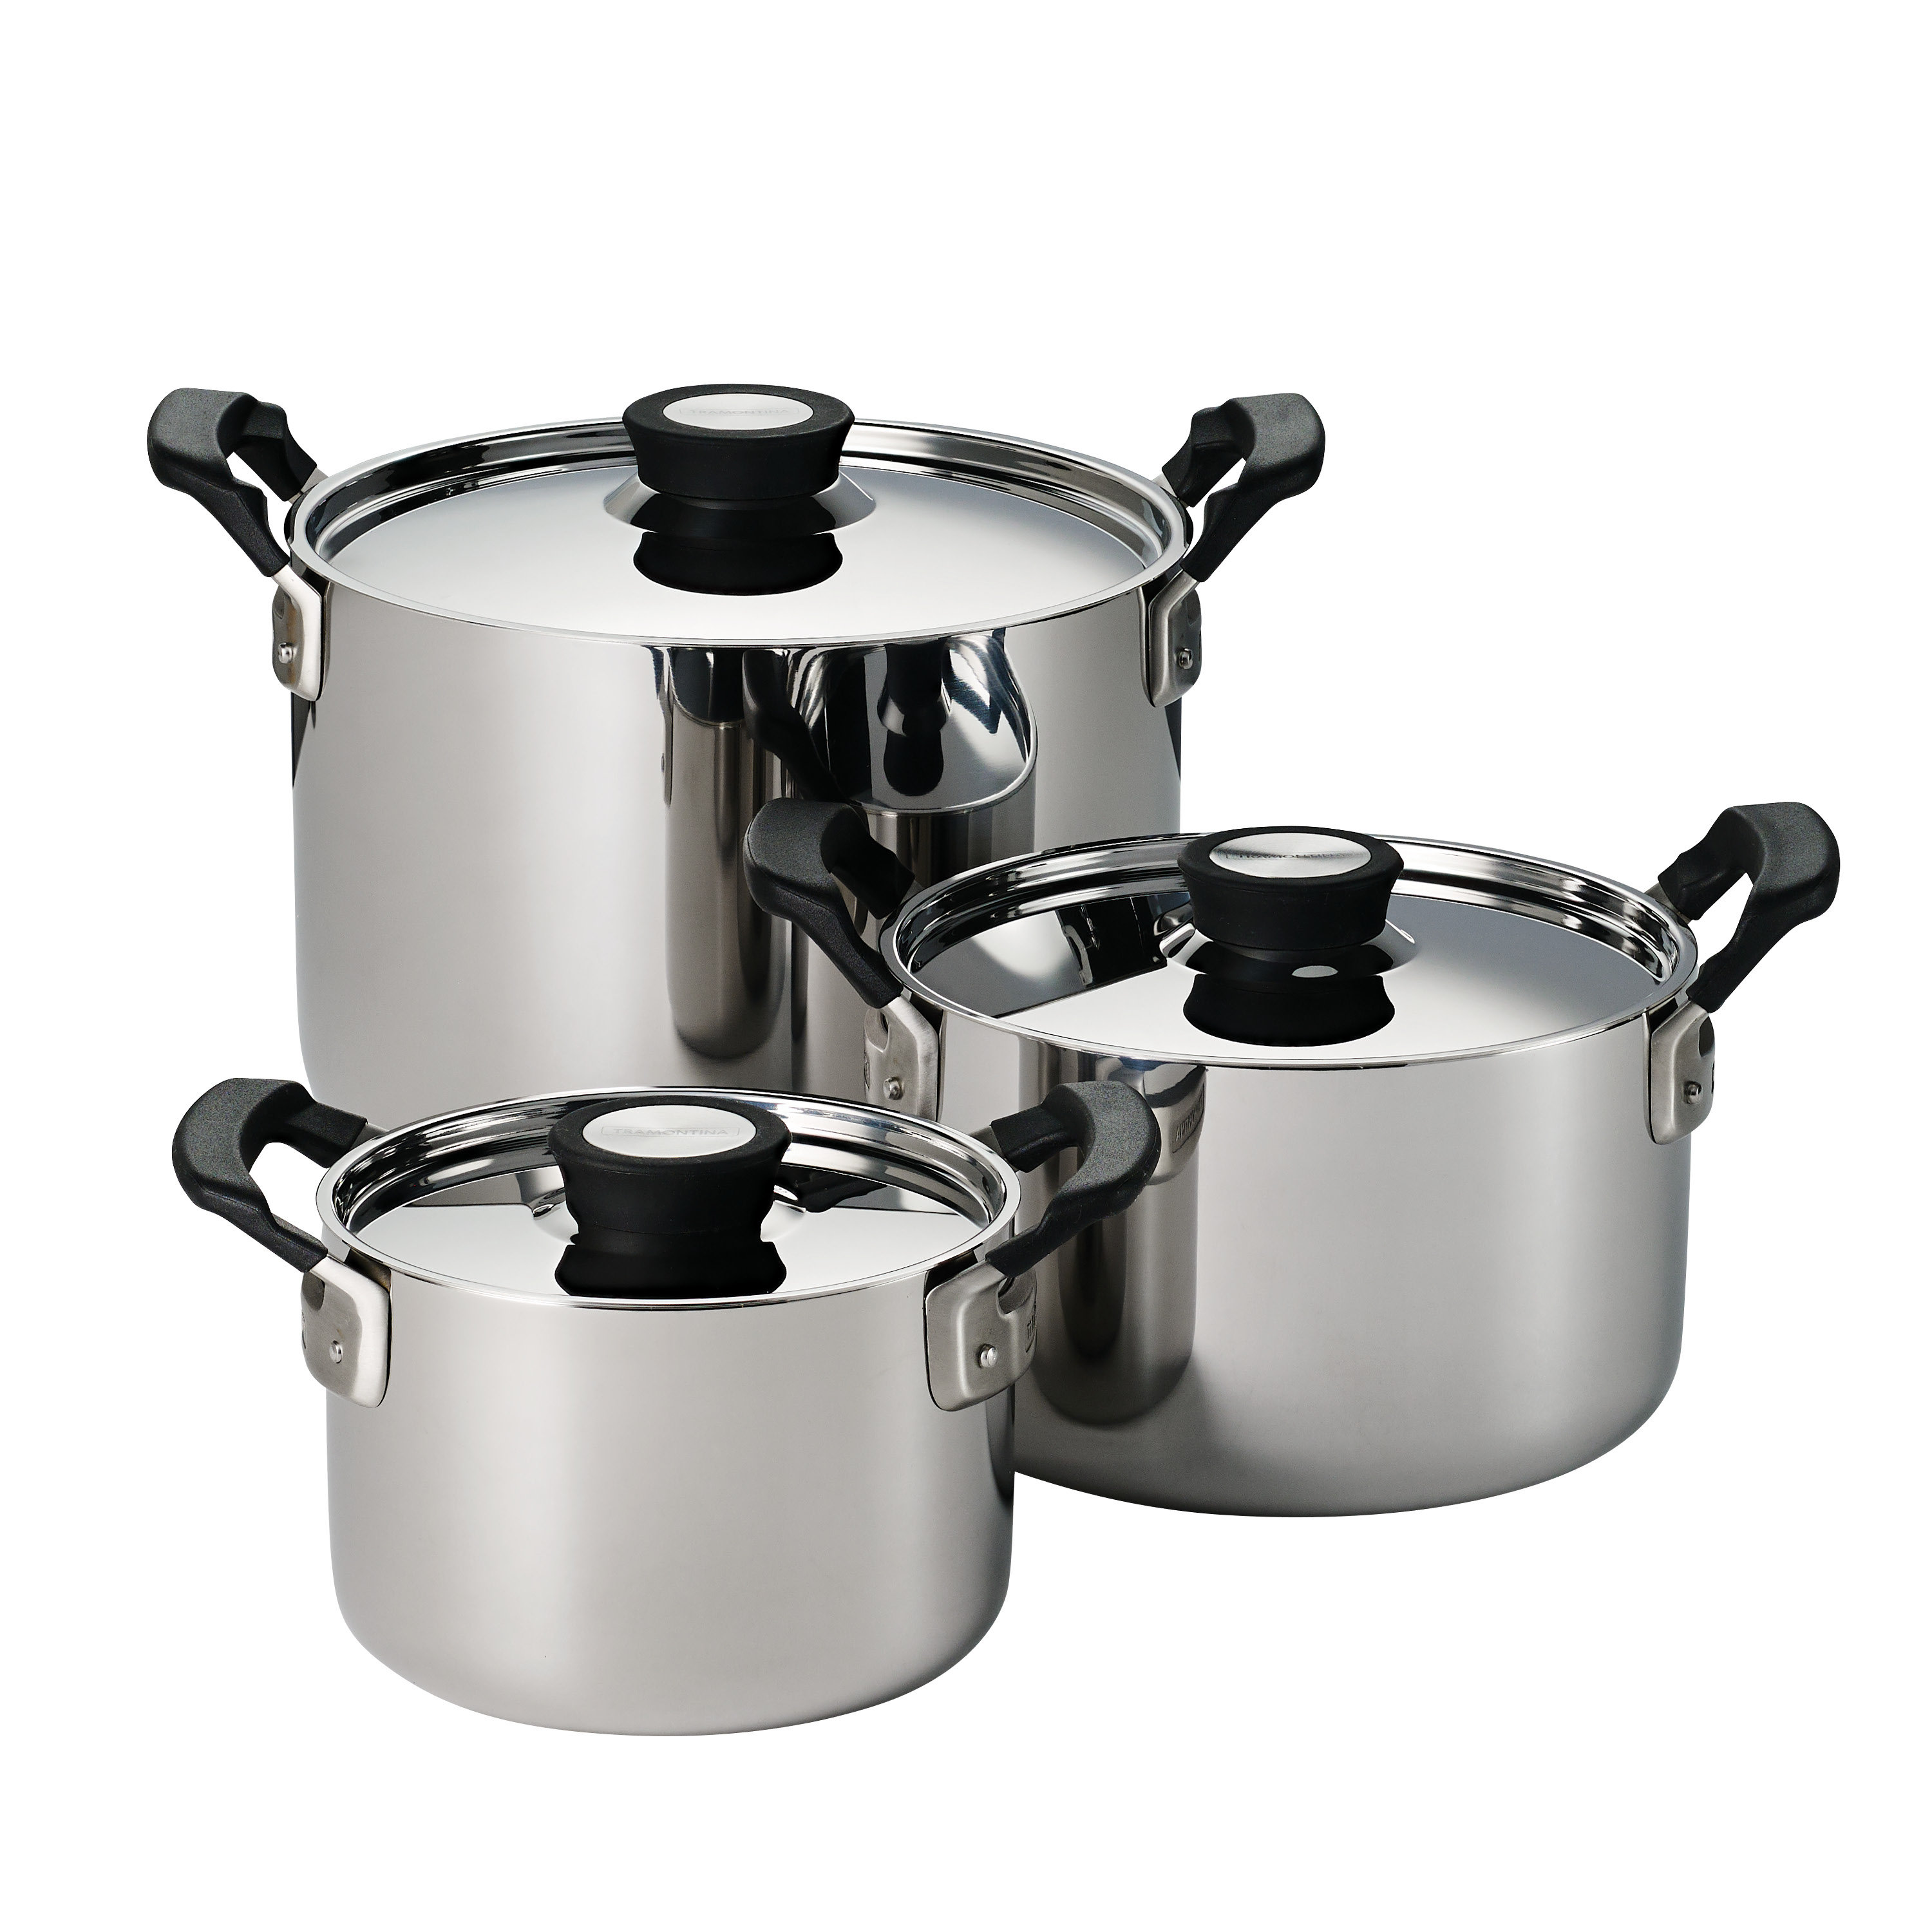 Tramontina Nesting 6 Pc Stainless Steel Tri-Ply Clad Sauce And Stock Pot Set